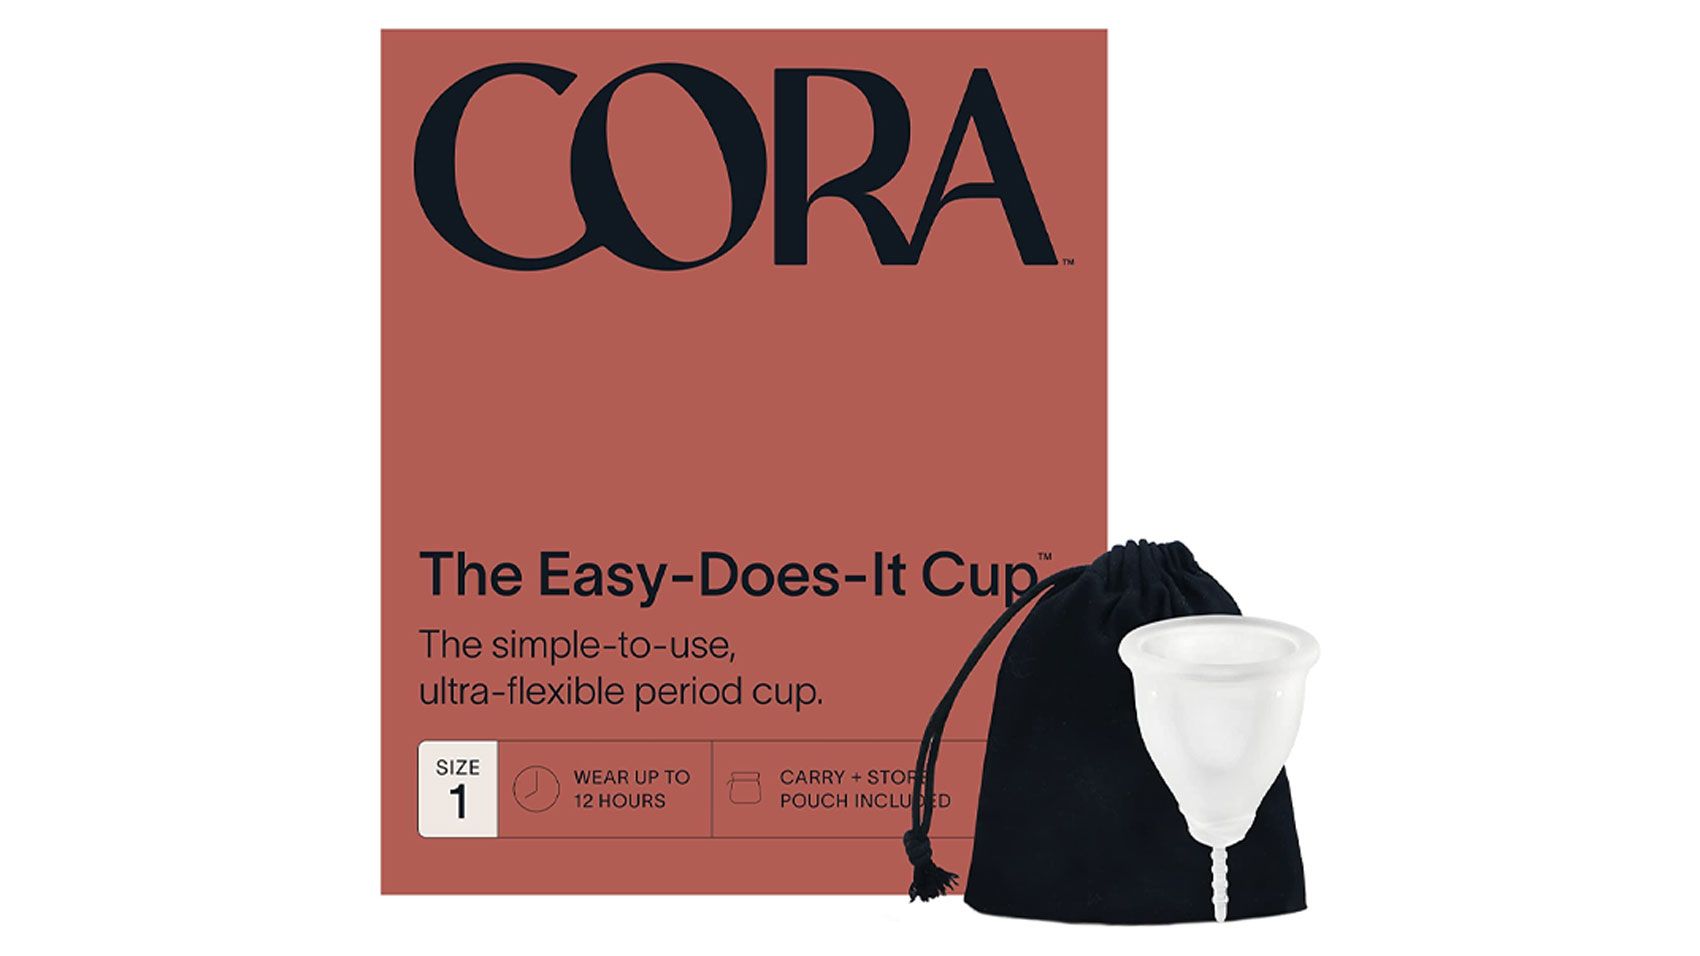 CareCup Menstrual Cup Kit - Tampon, Pad, and Disc Alternative Product -  Wear for 12 hours - Reusable Period Cup/Copa Designed with Soft Flexible